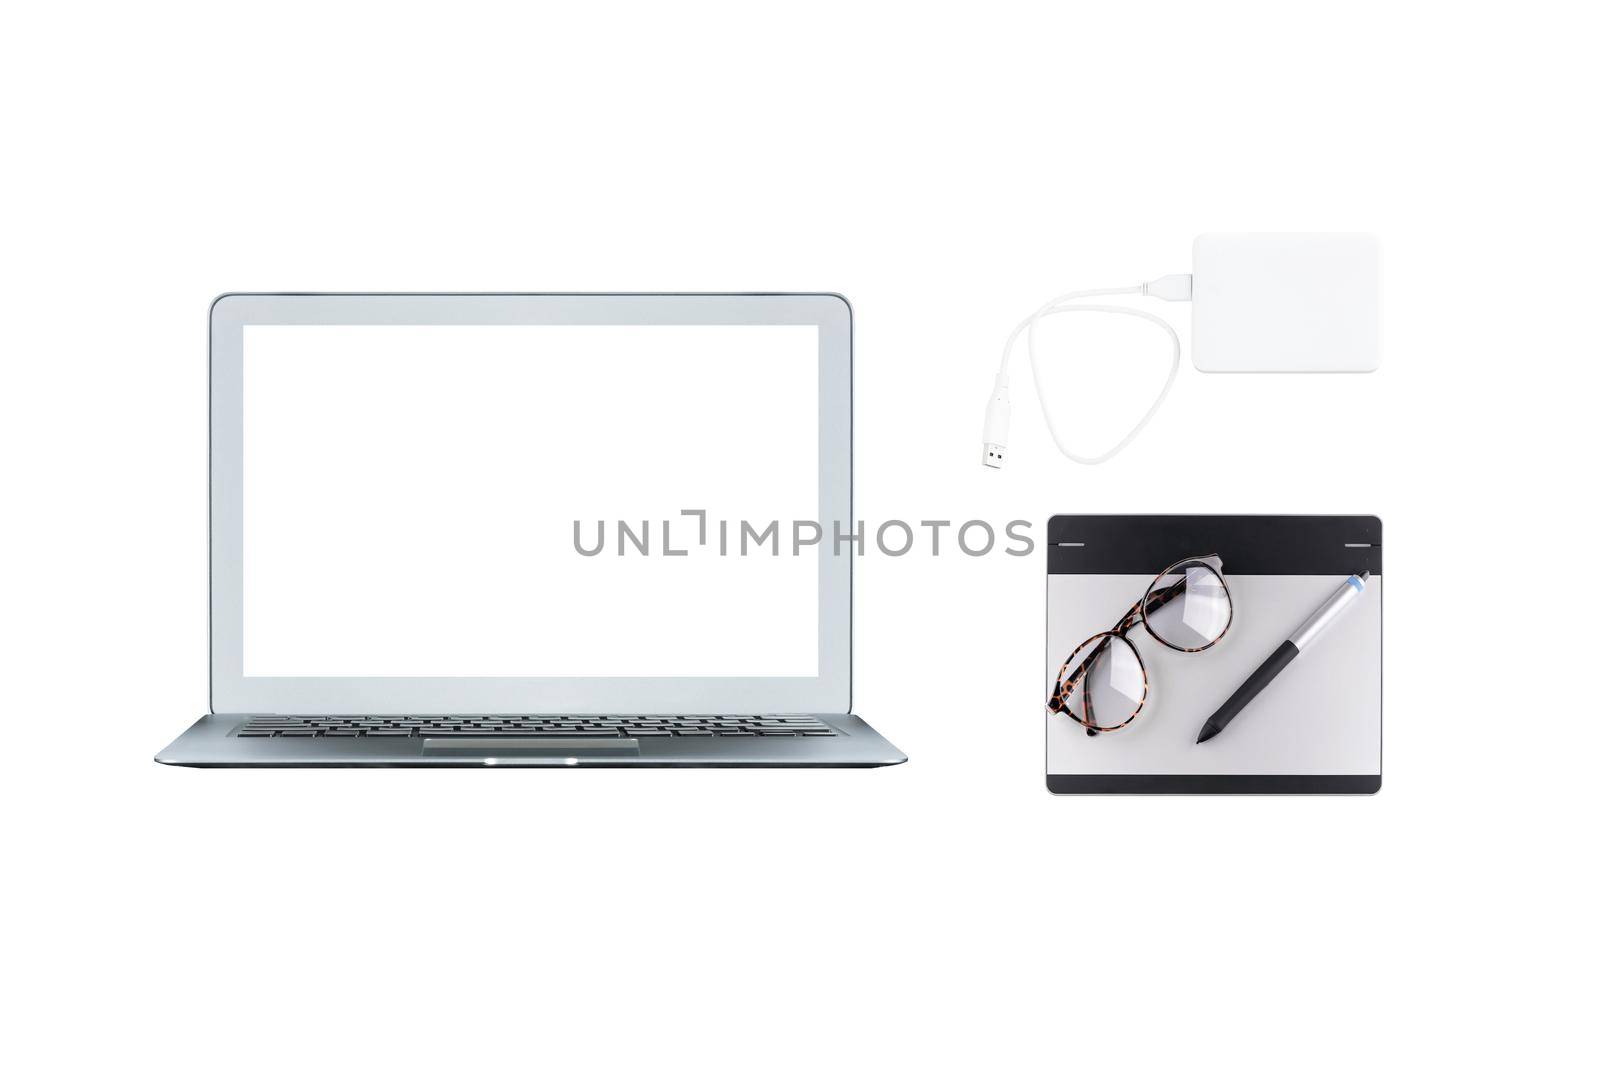 Computer laptop, graphic tablet and external harddisk isolated on white background. Object for technology and gadget for modern lifestyle and freelance work concept.